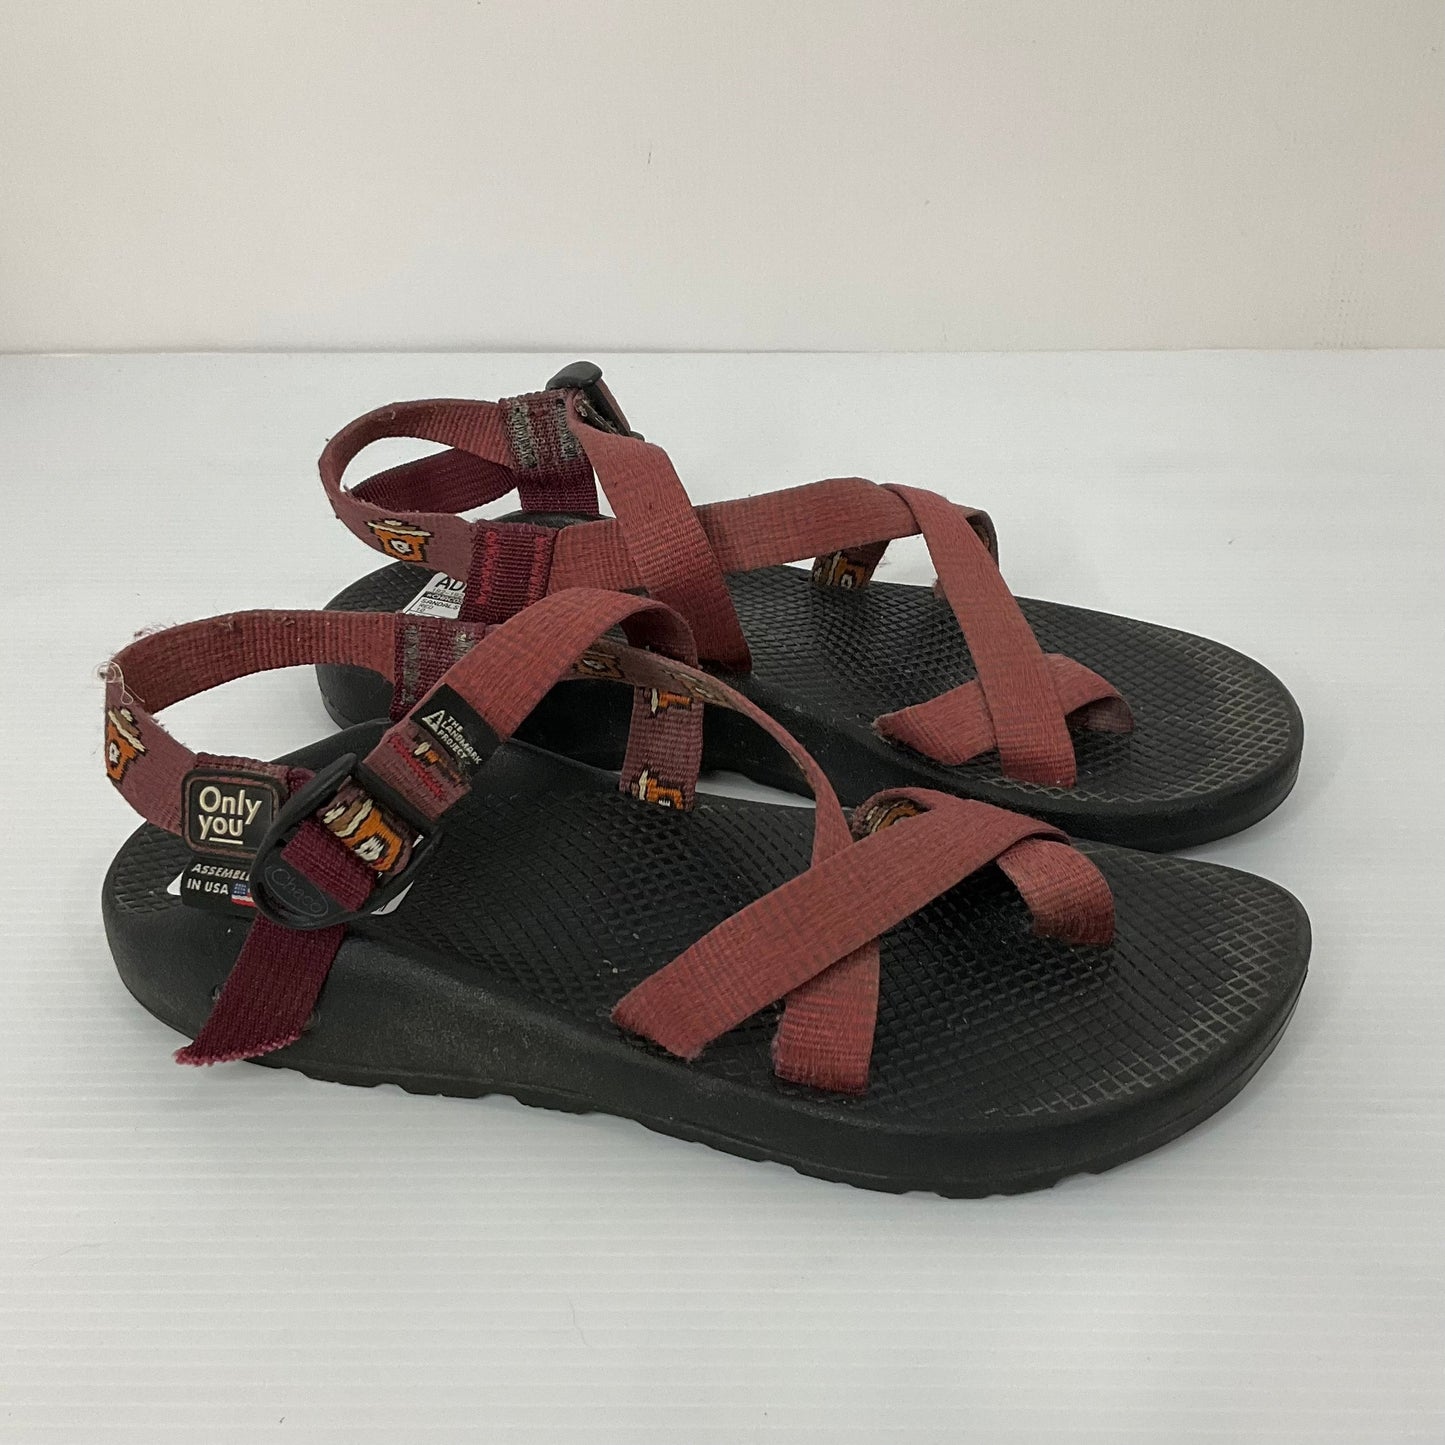 Red Sandals Sport Chacos, Size 10